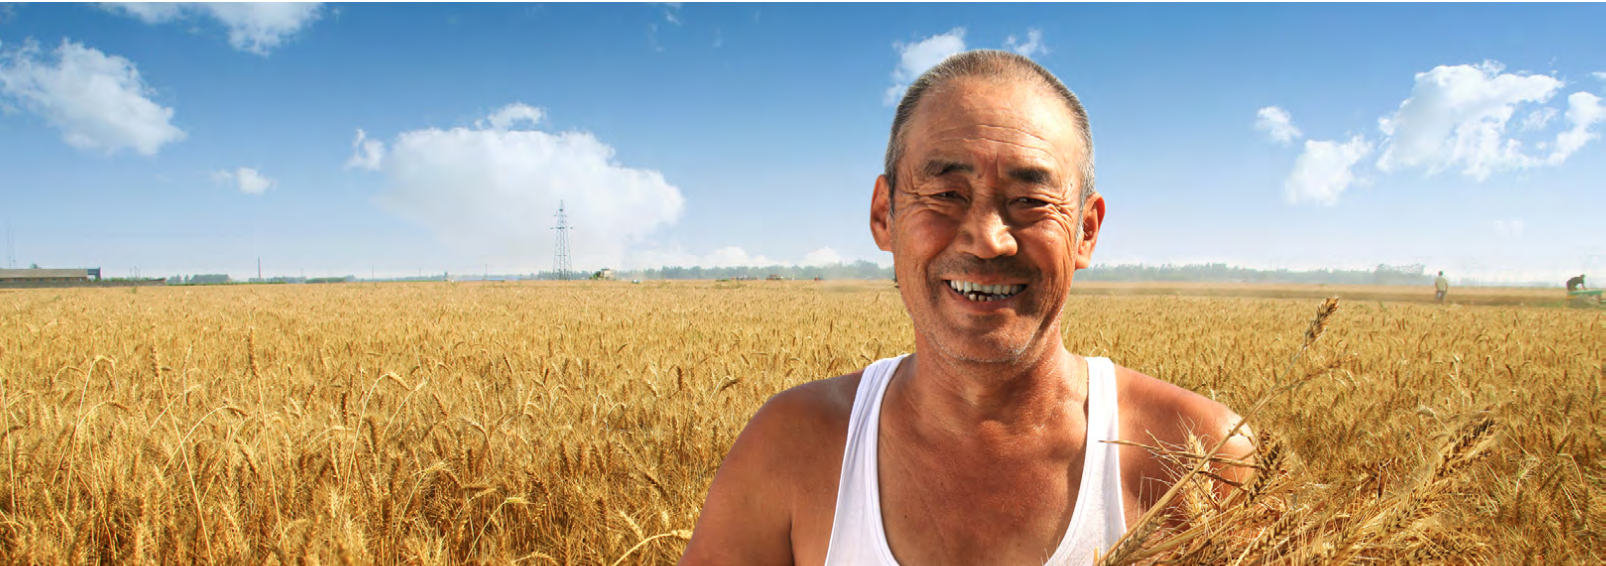 A rural Chinese man wearing a white singlett stands in a wheat field below blue skies. He is smiling infectiously.